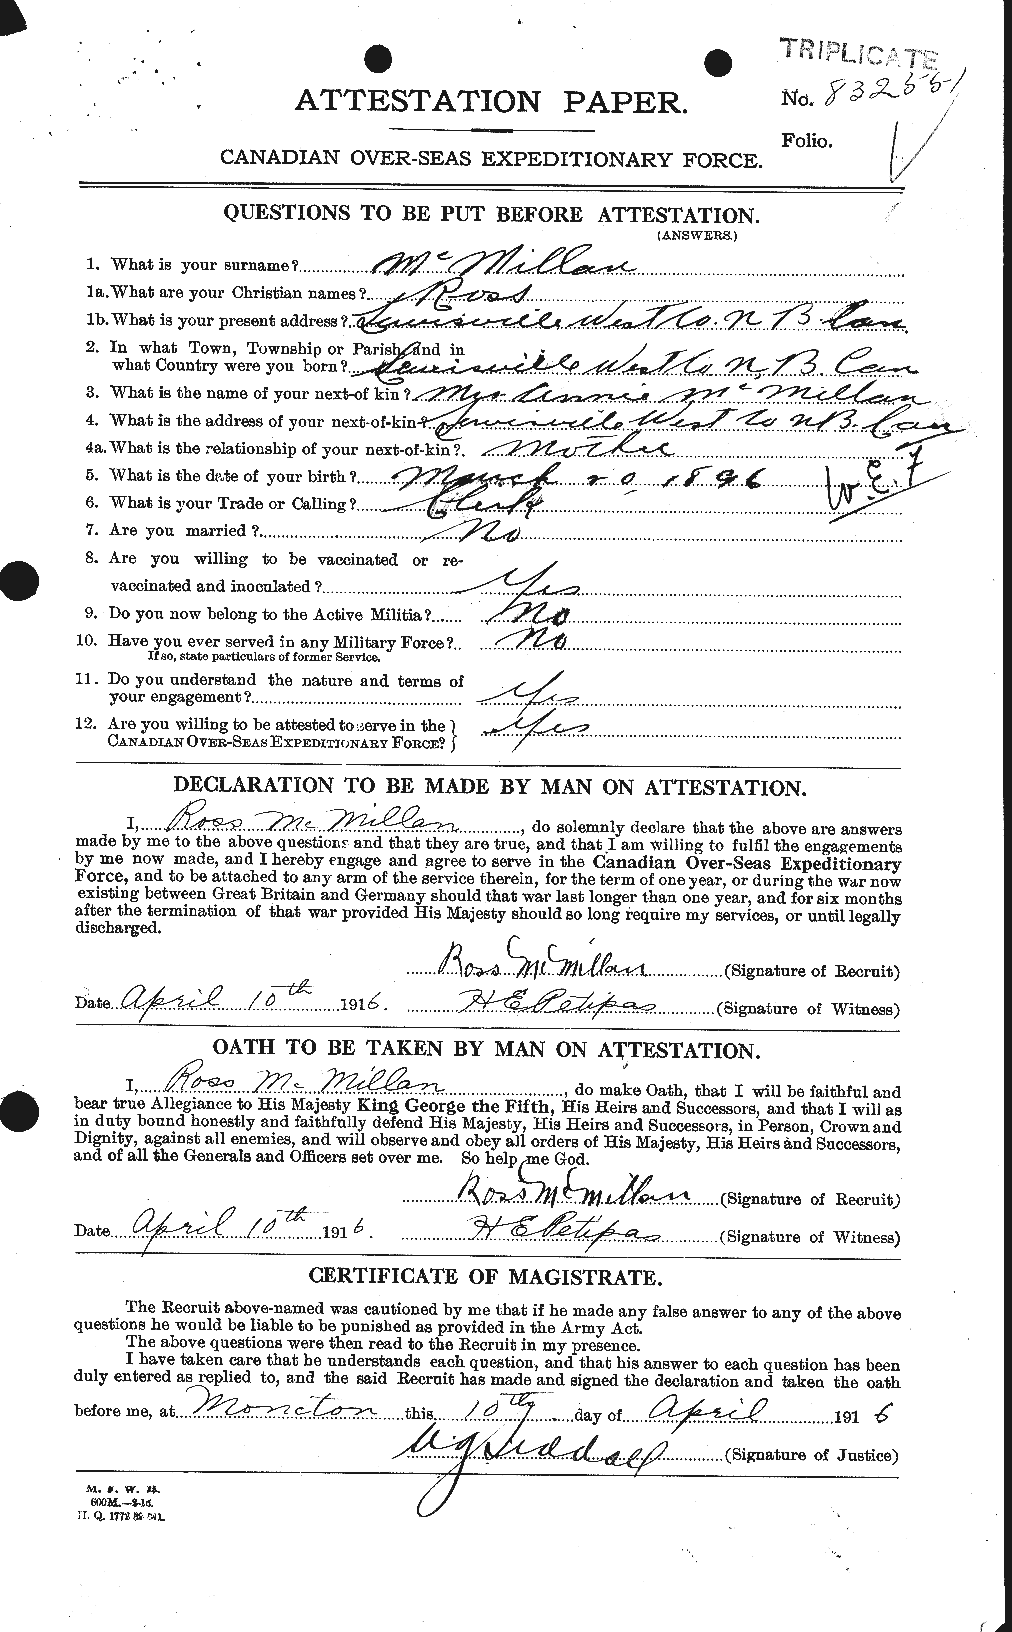 Personnel Records of the First World War - CEF 536941a